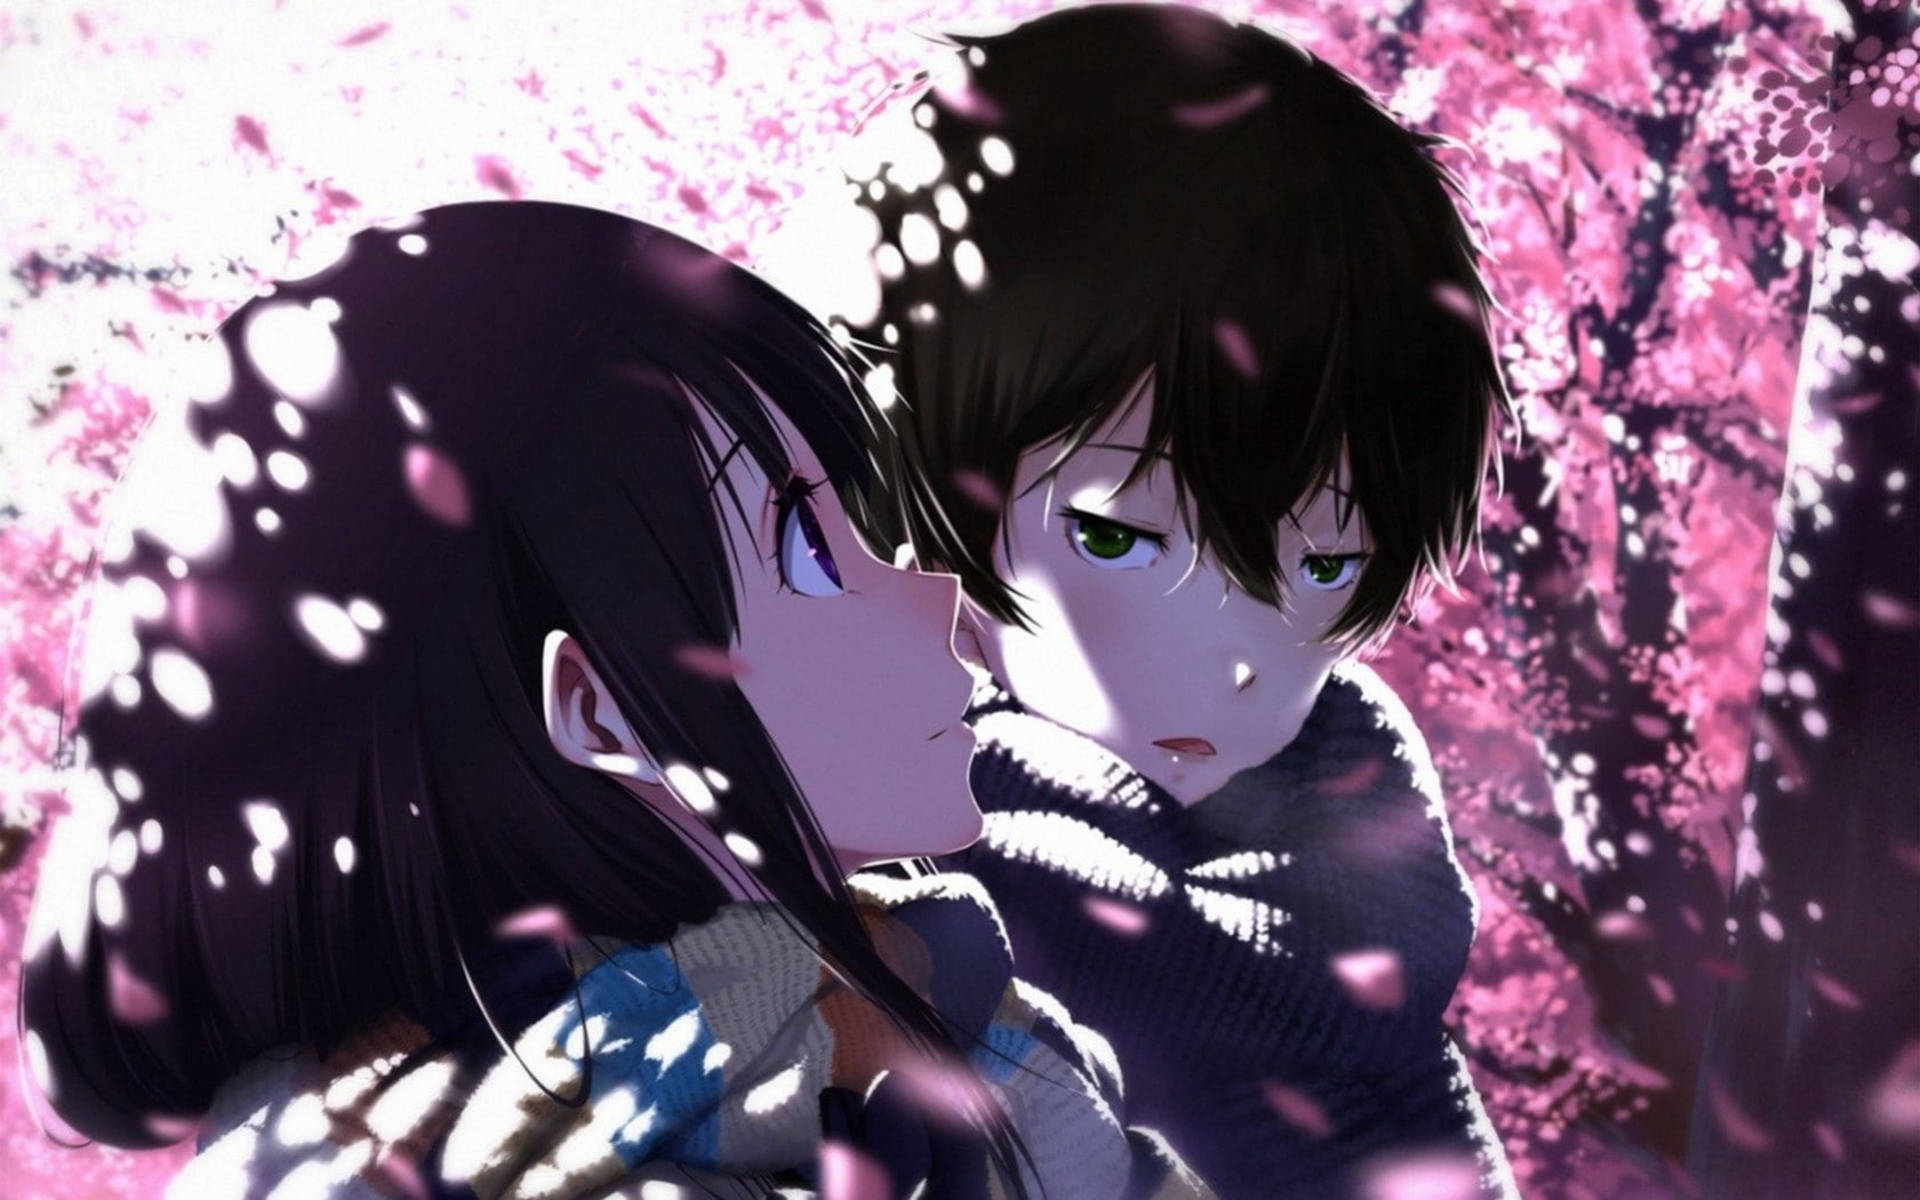 Cute Anime Couple With Cherry Blossoms Background